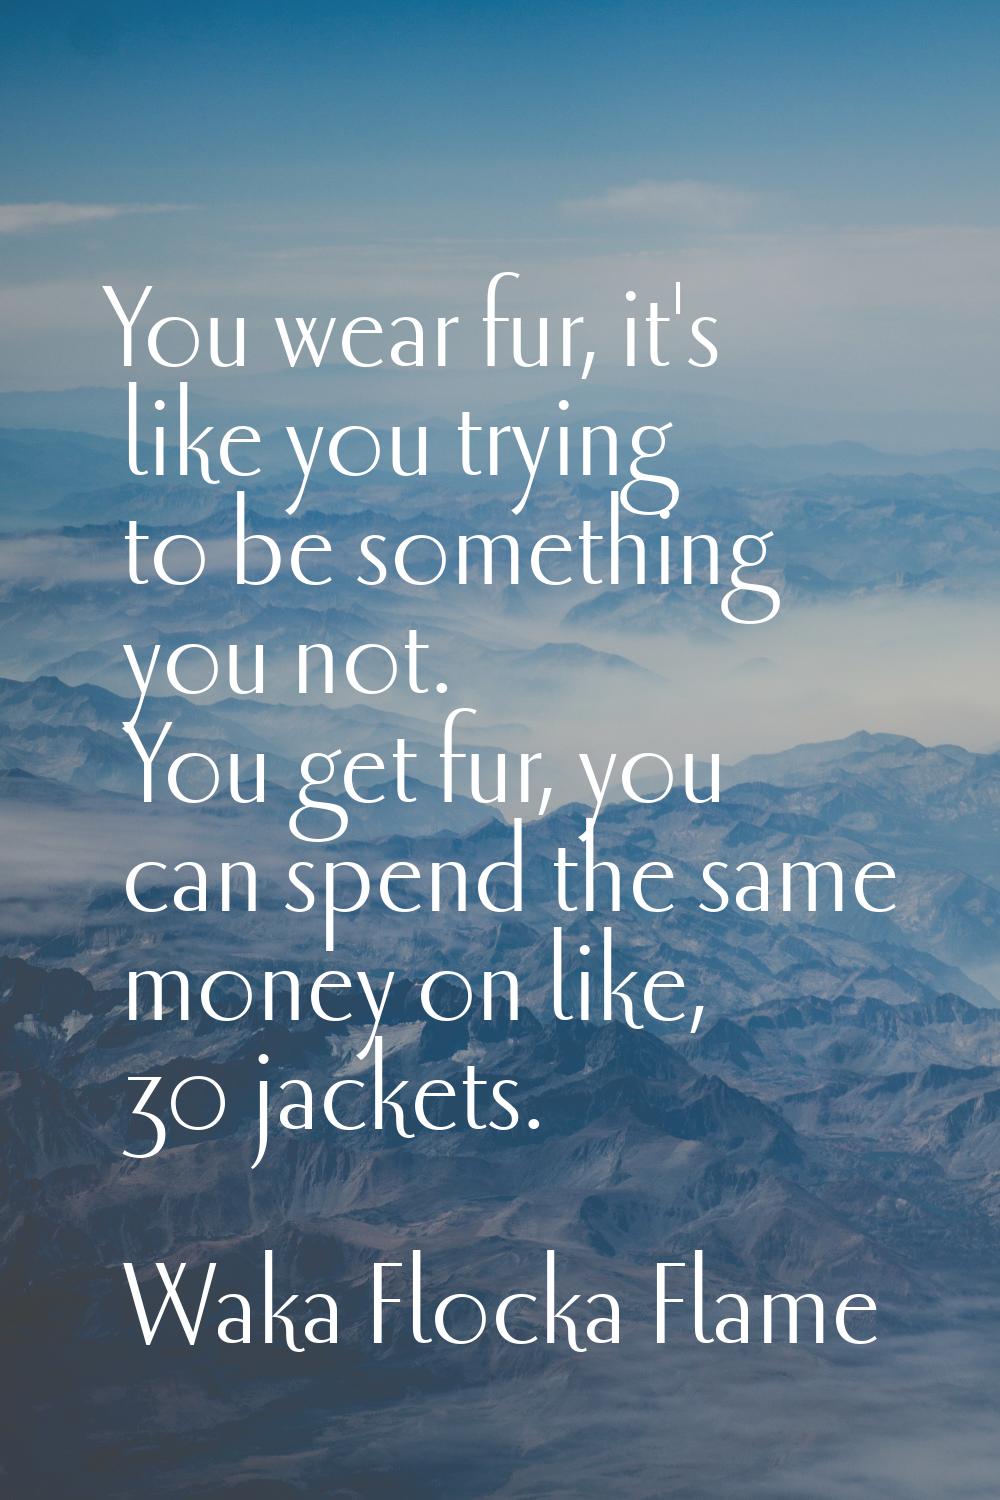 You wear fur, it's like you trying to be something you not. You get fur, you can spend the same mon